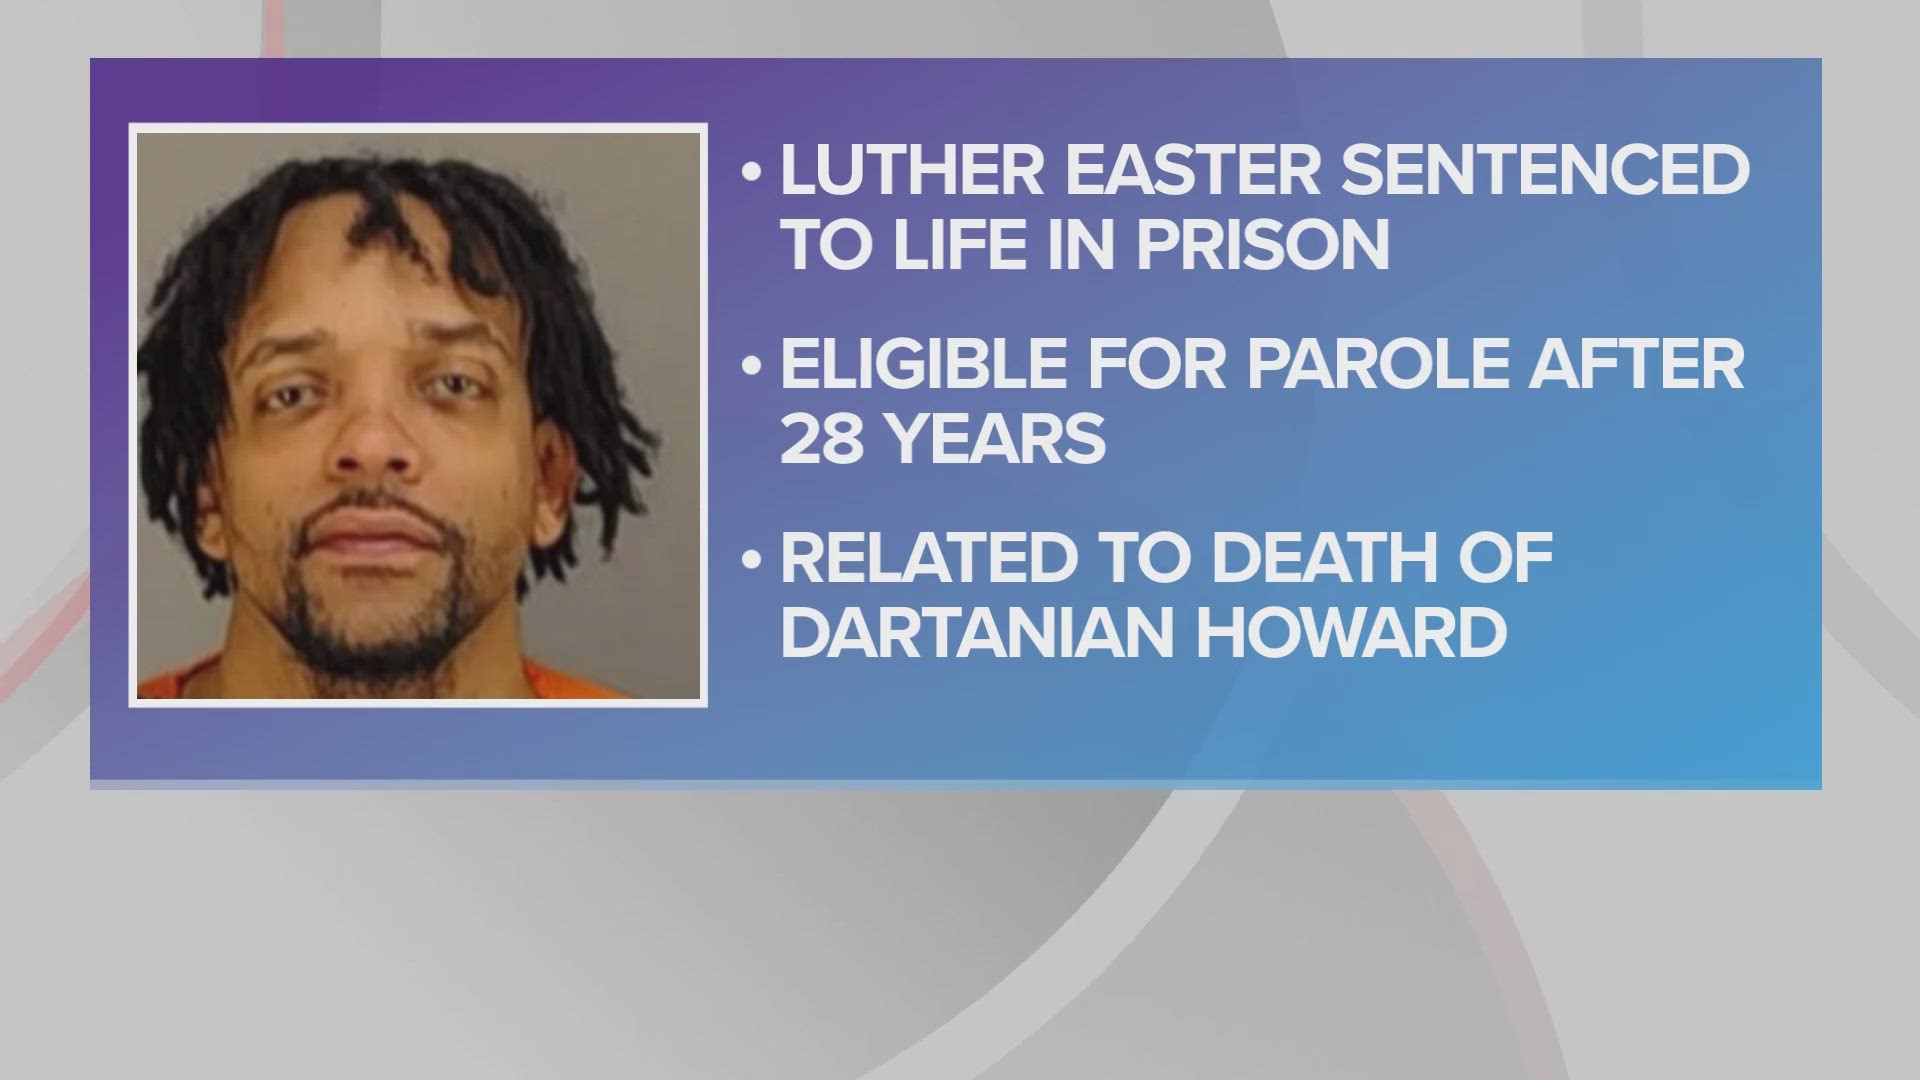 According to the Summit County Prosecutor's Office, Luther Easter will be eligible for parole after serving 28 years of his sentence.